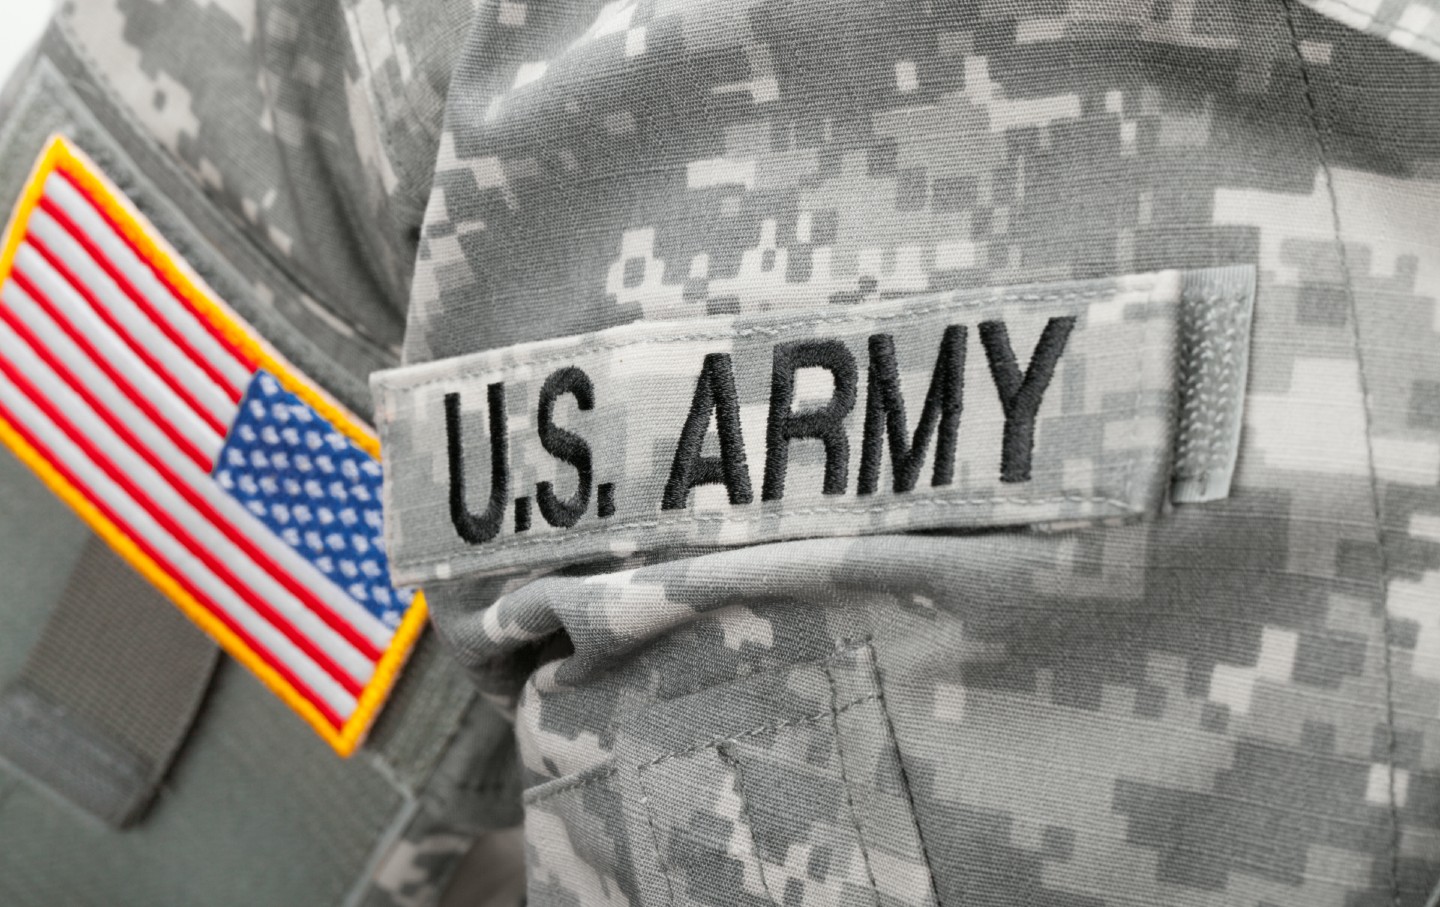 US Army and flag patch on solder's uniform